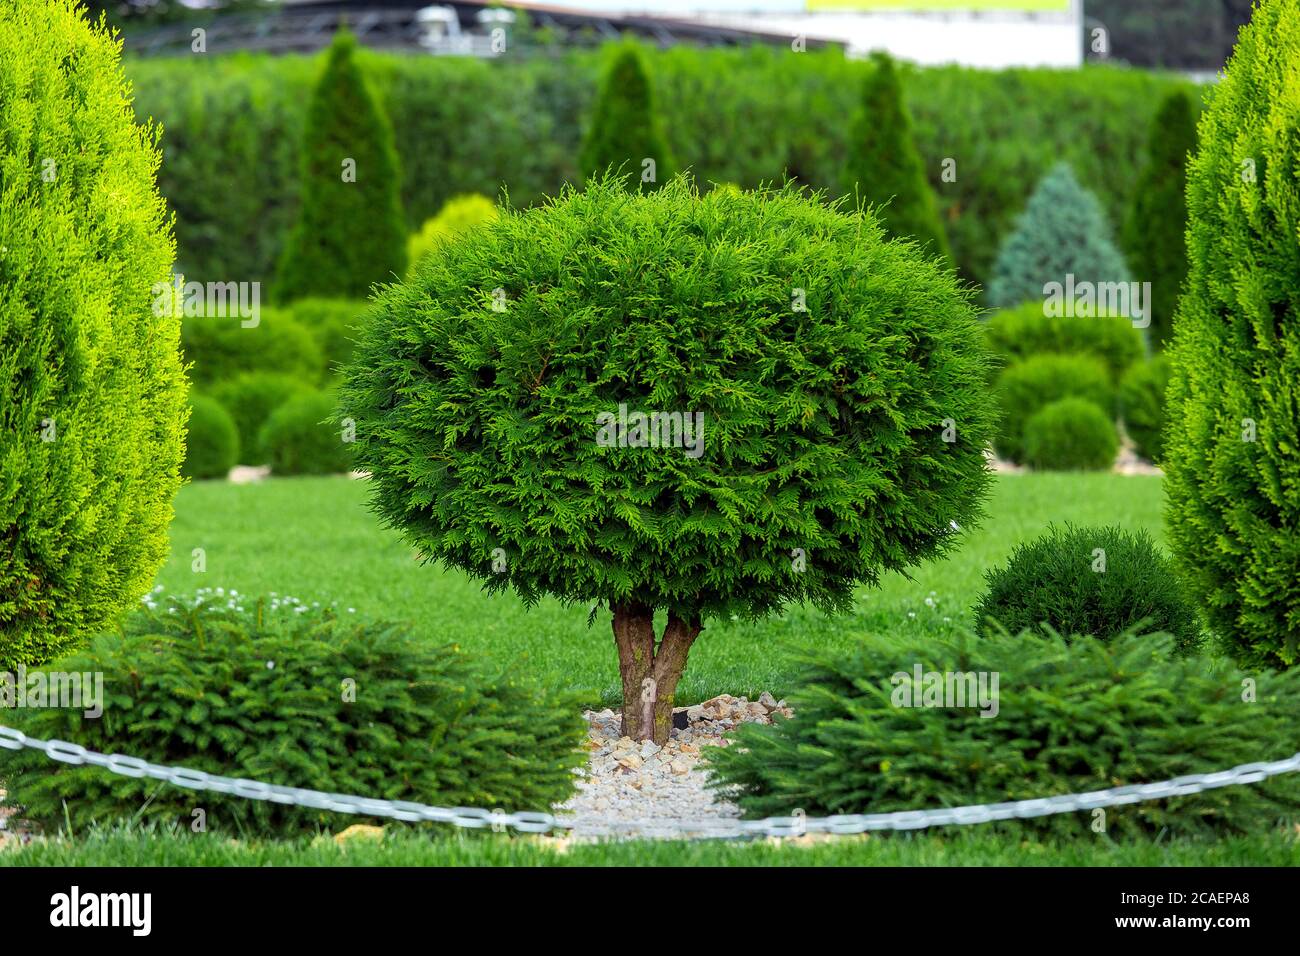 molded sheared evergreen thuja tree in the backyard with stone mulch and green lawn in the garden, greenry park. Stock Photo